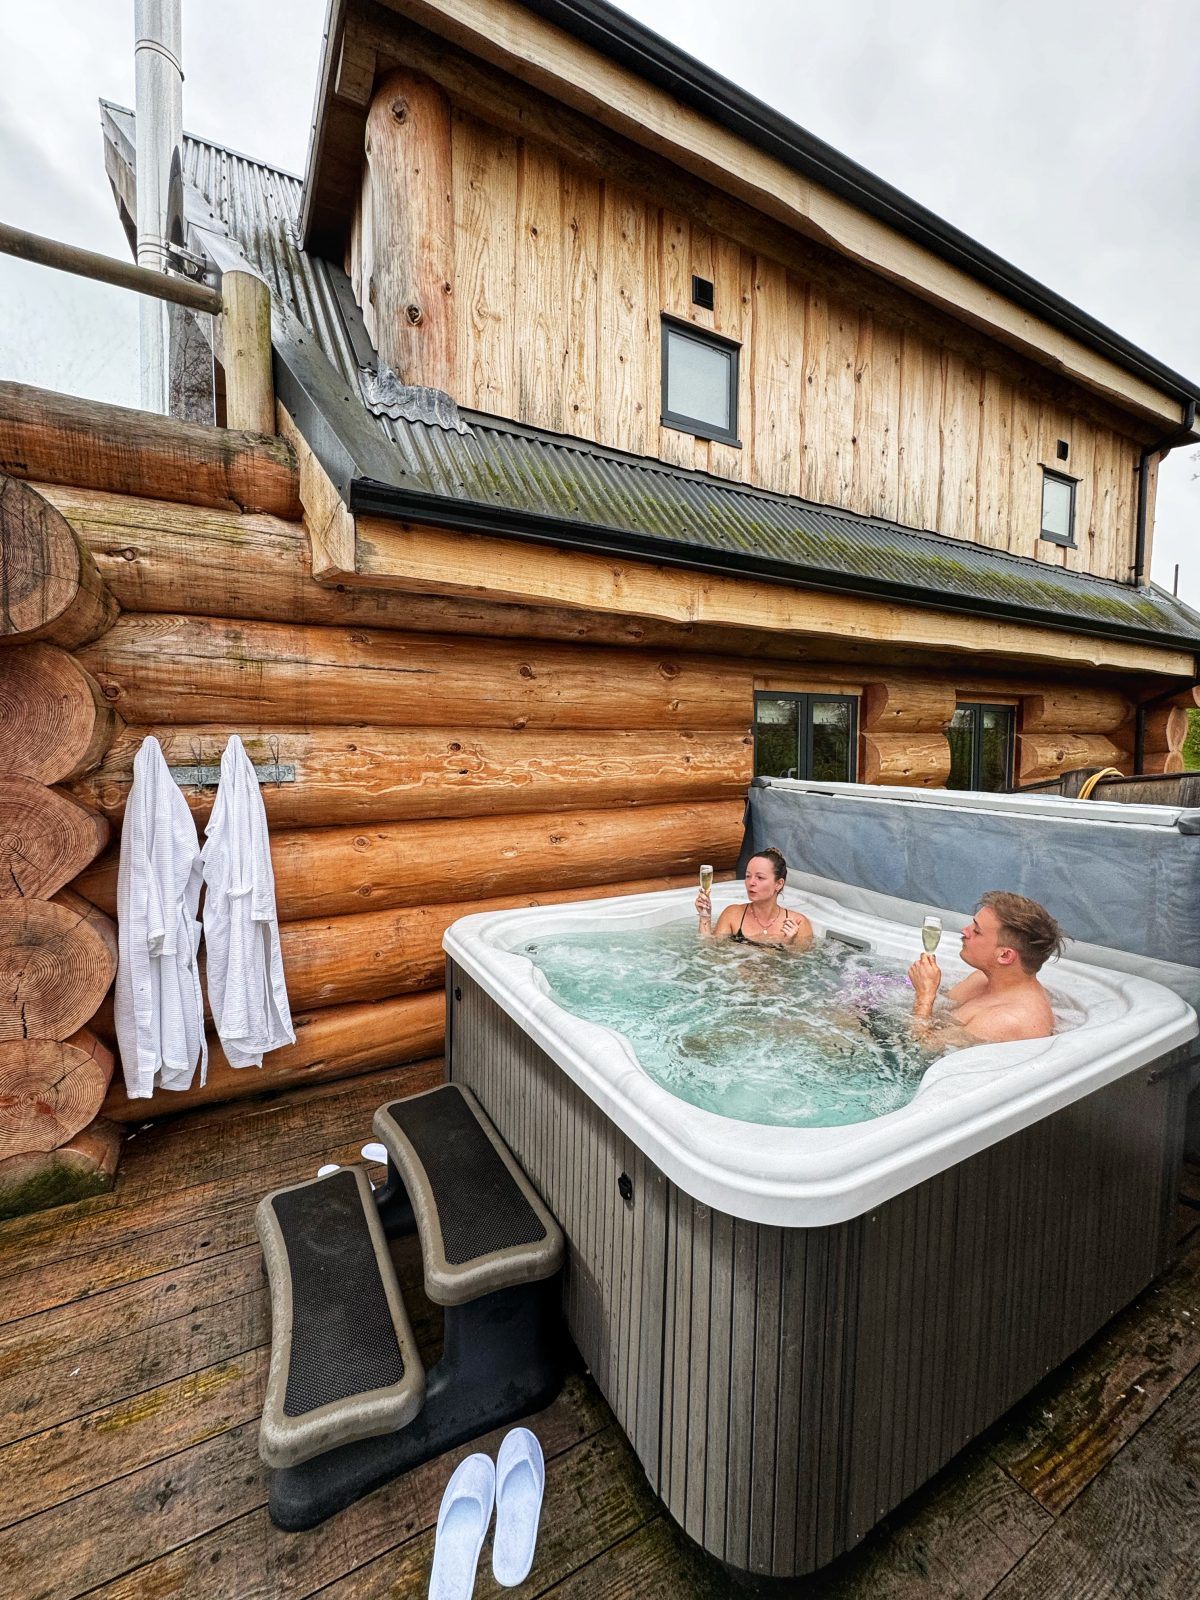 Hot tubs are included in all the cabins at Olicana Park